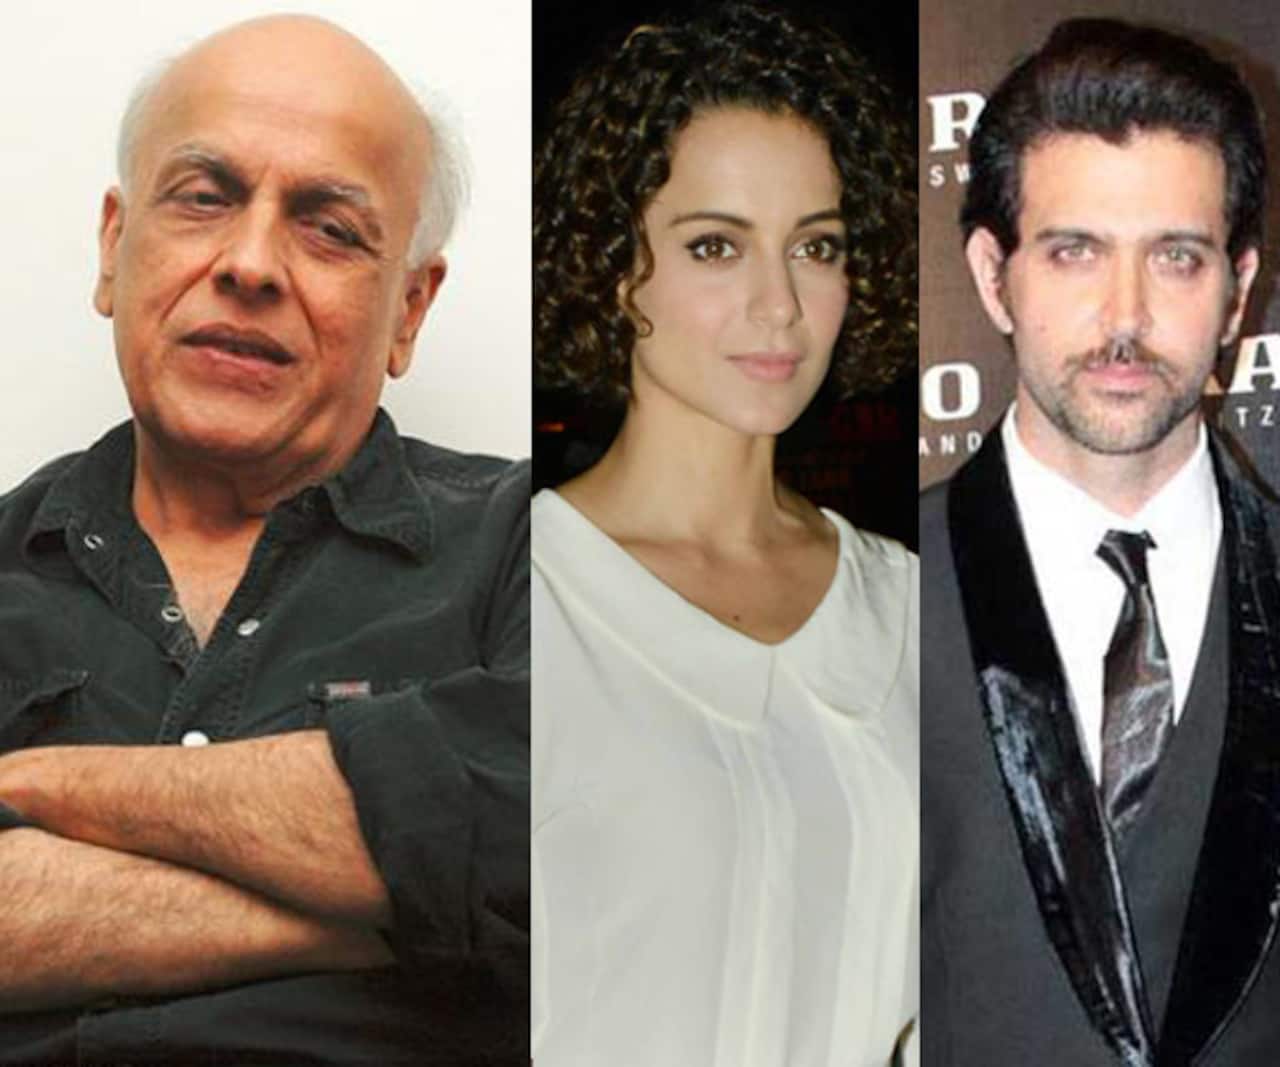 Hrithik Roshan went to Mahesh Bhatt for advice on the legal case against  Kangana Ranaut! - Bollywood News & Gossip, Movie Reviews, Trailers & Videos  at 